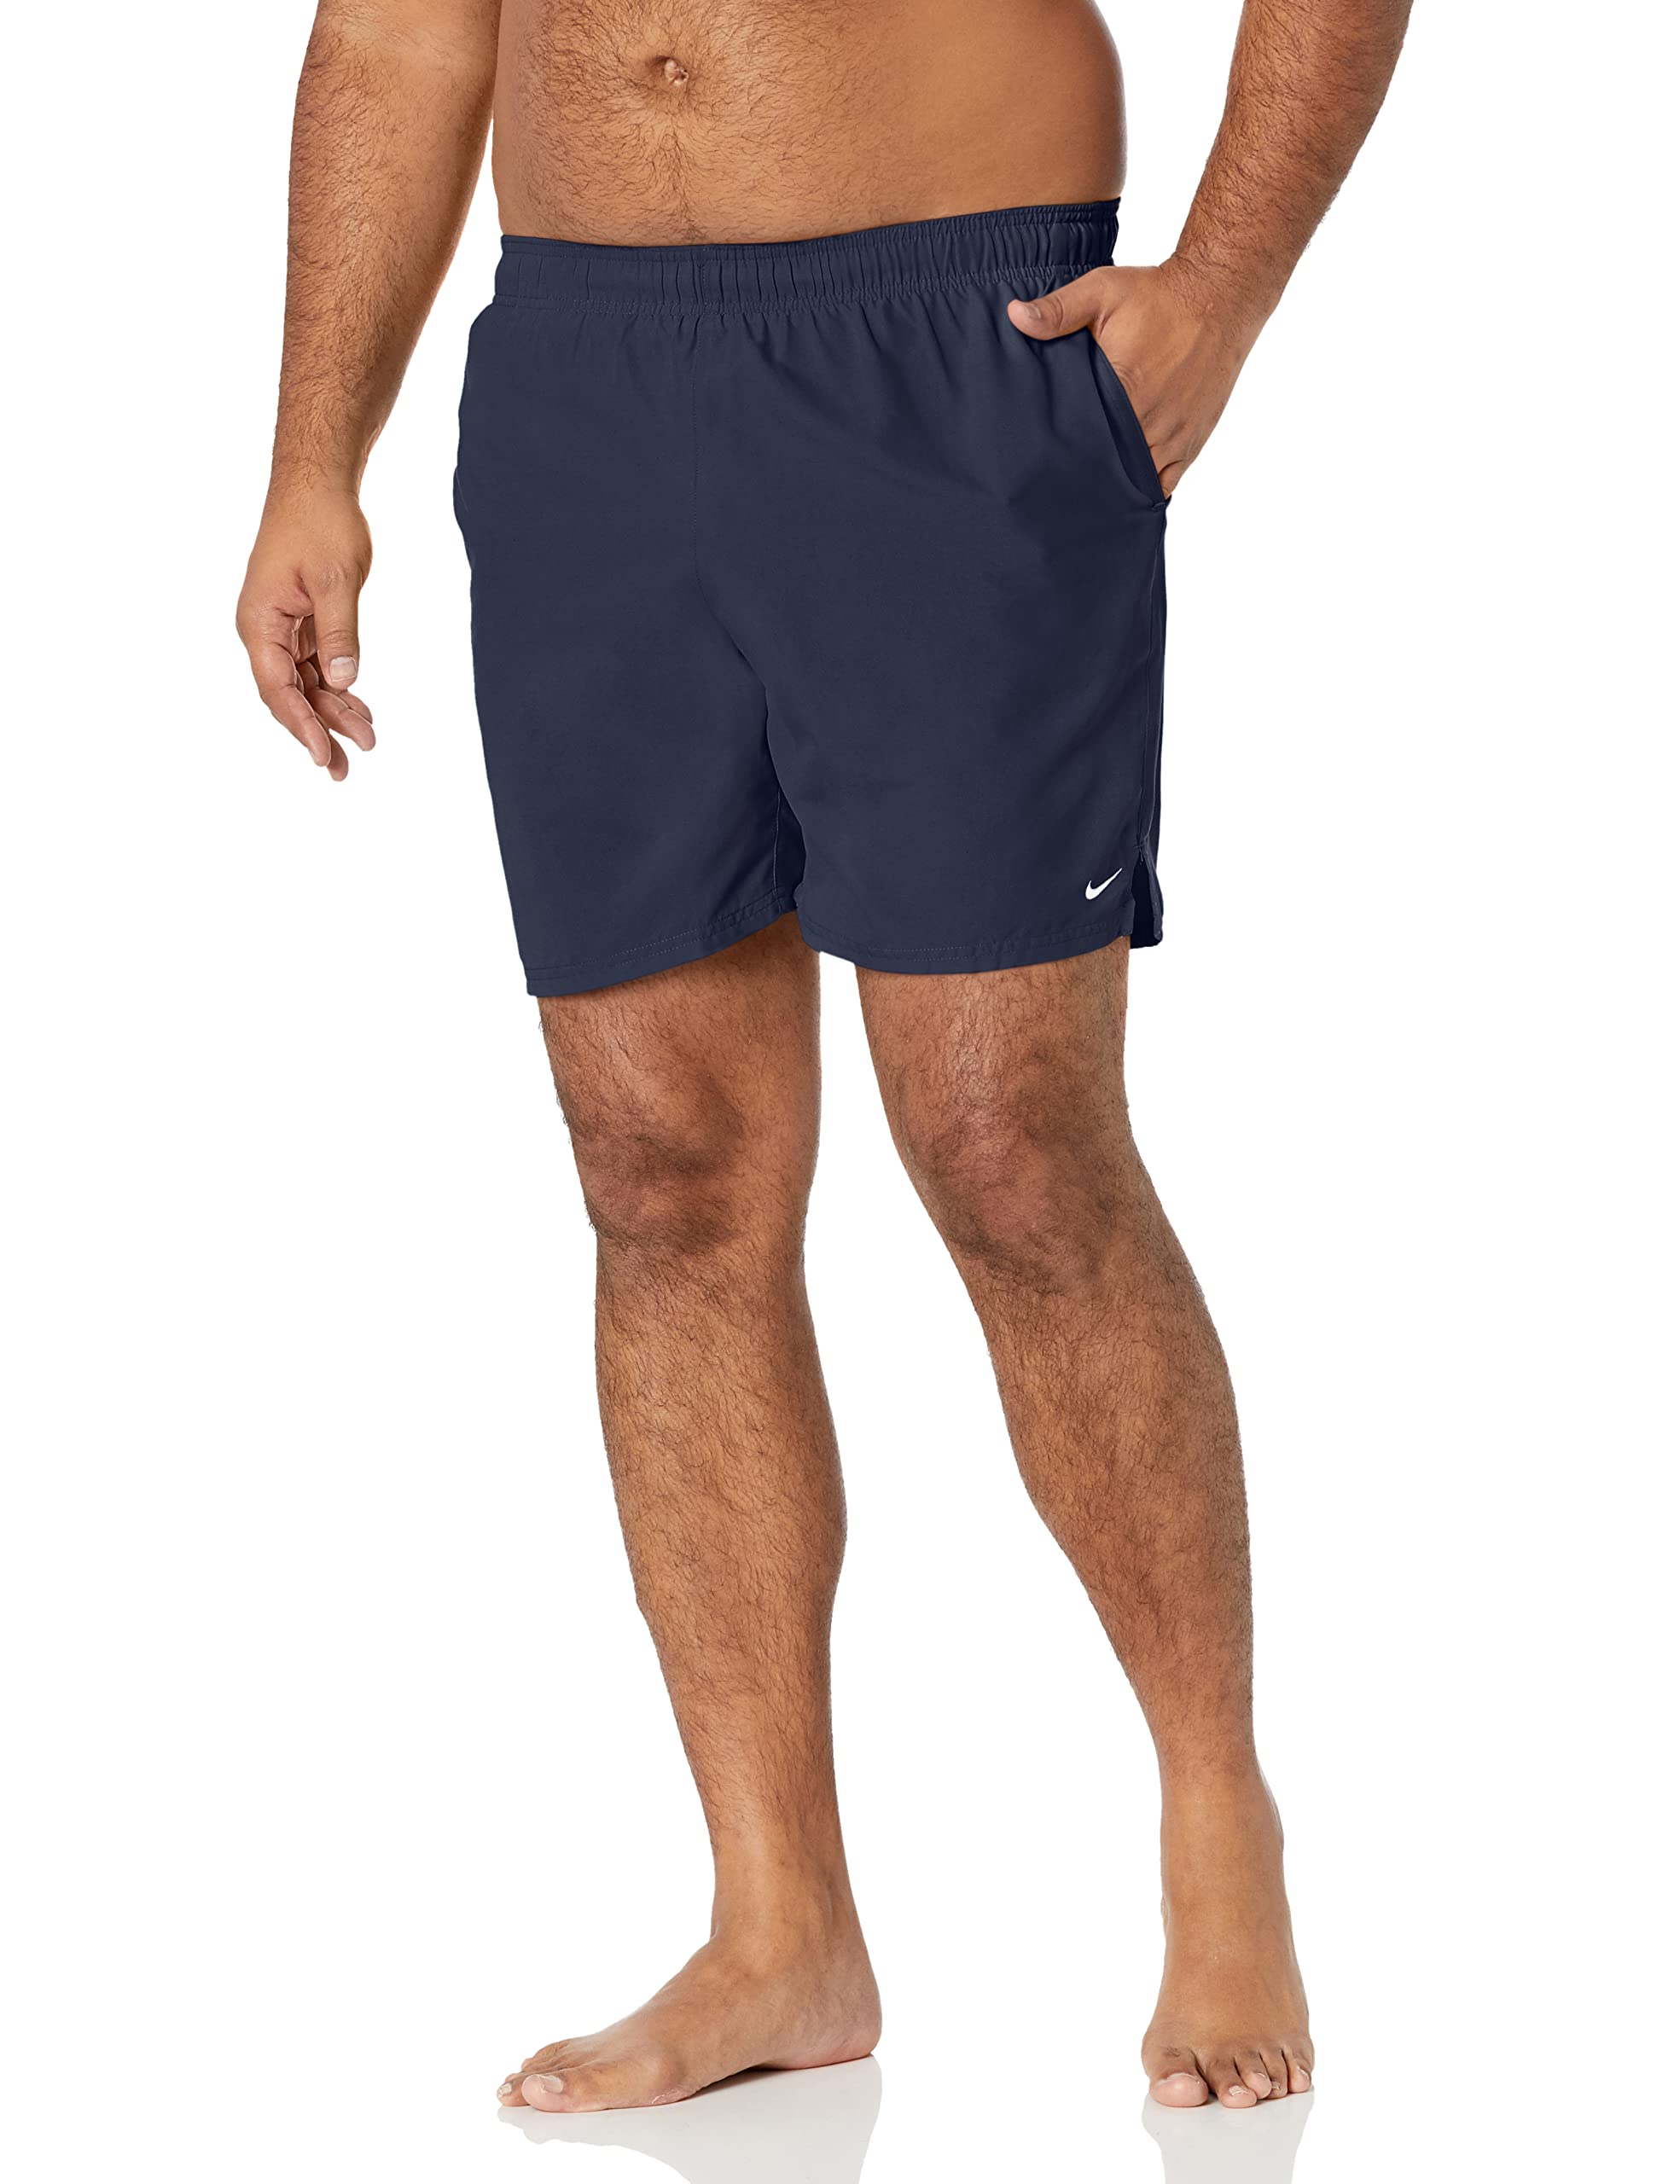 Nike Mens Solid Lap 7 Inch Volley Short Swim Trunk - Midnight Navy White - S